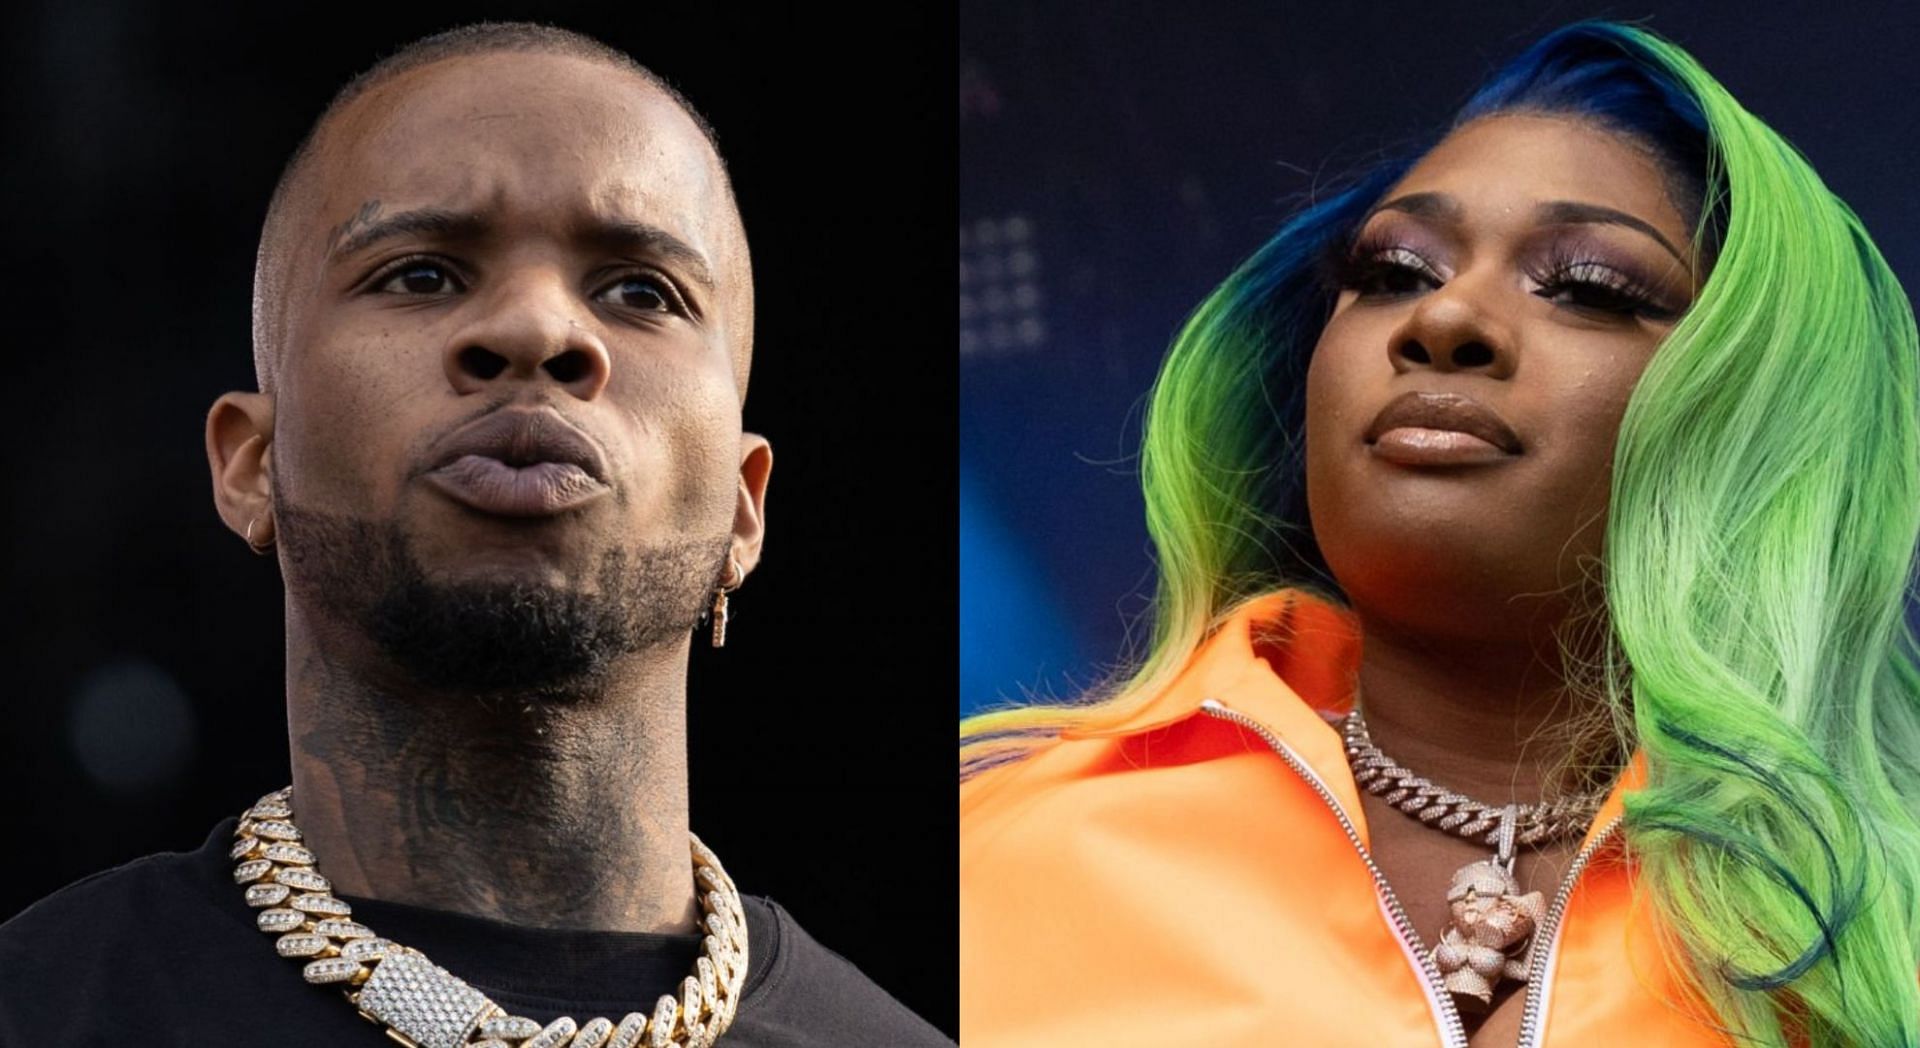 Tory Lanez has been found guilty of shooting Megan Thee Stallion in the feet on July 2020 (Image via Getty Images)